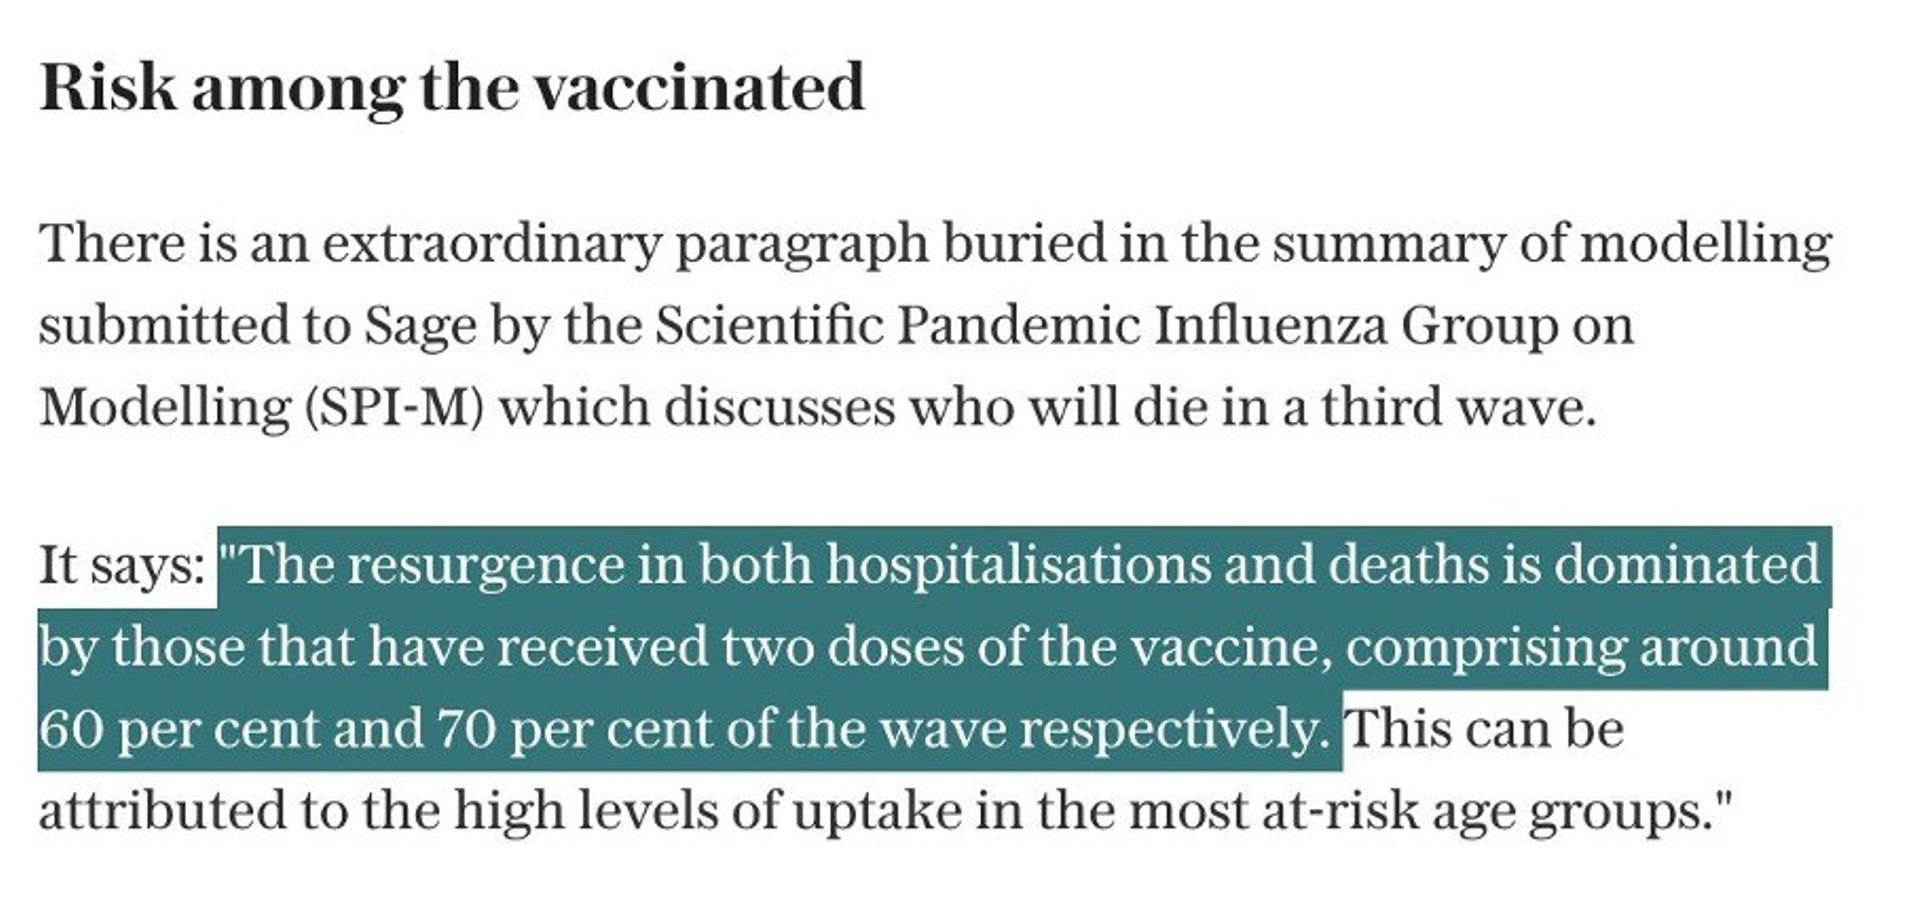 Extrait d’un article du Telegraph : "Why the models warning of a third UK Covid wave are flawed".
Source : https://www.telegraph.co.uk/news/2021/04/06/government-models-warning-third-wave-based-flawed-figures-telegraph/